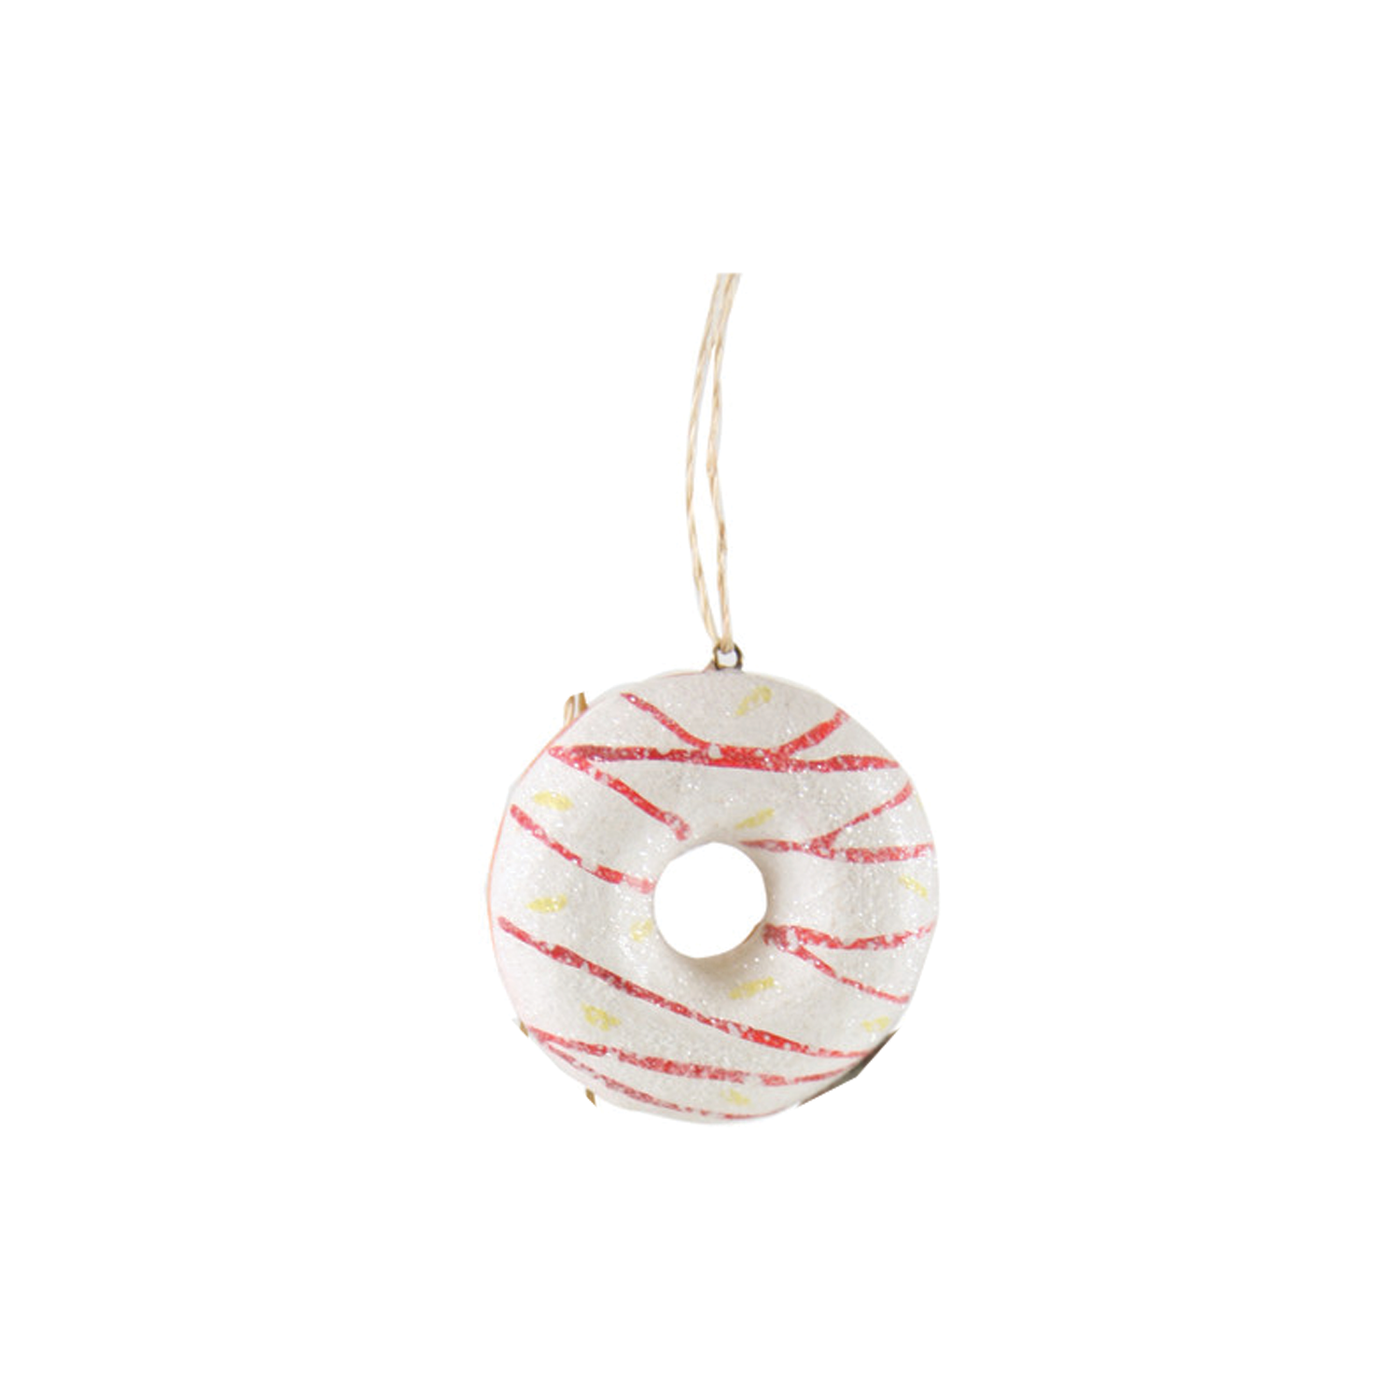 Tiny Donut Ornament - White With Pink Stripes